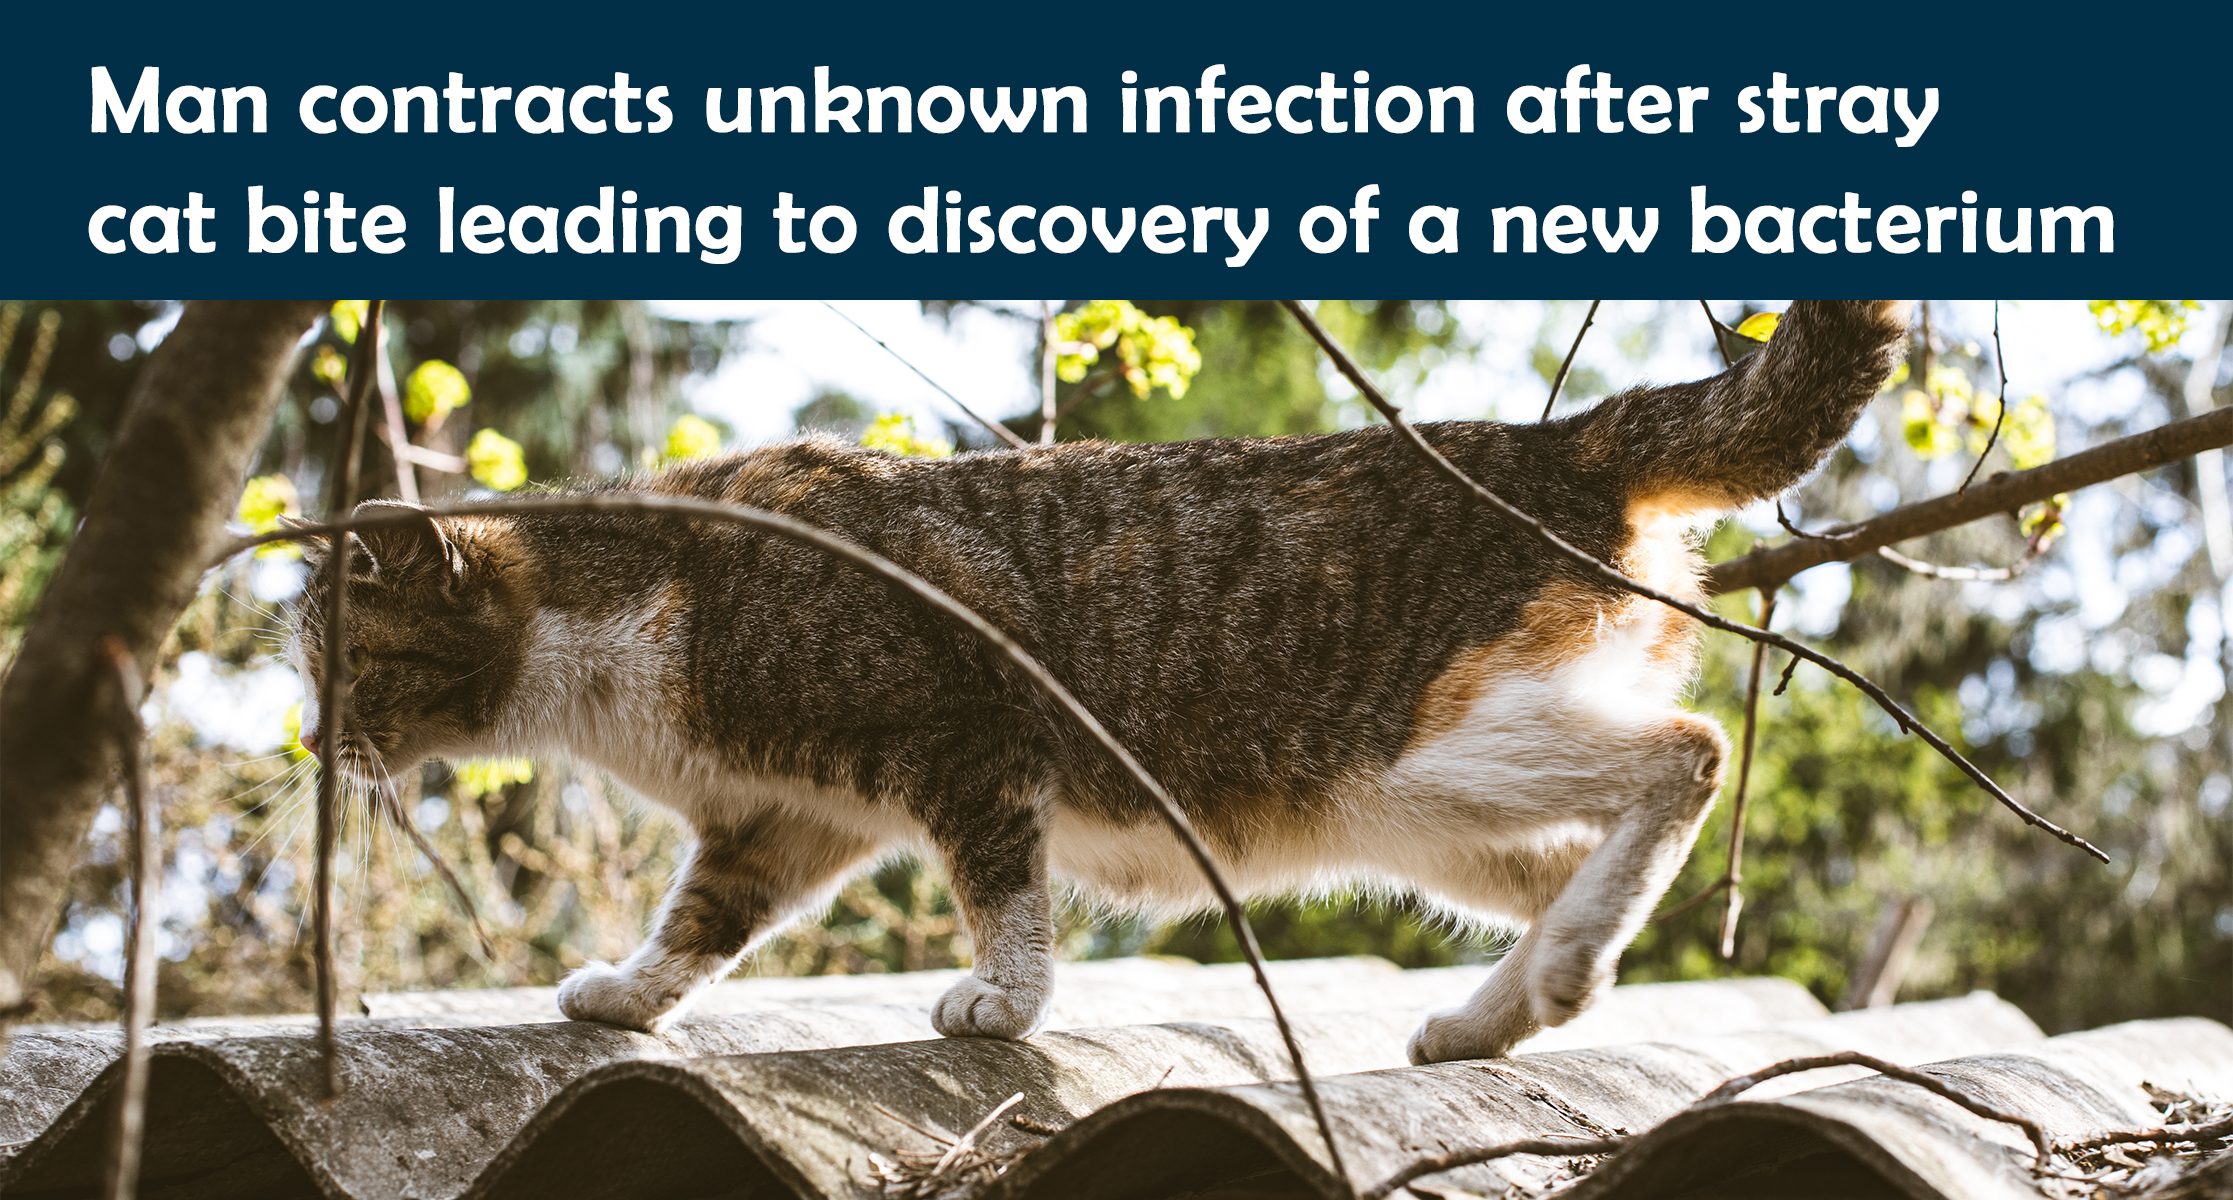 Man contracts unknown infection after stray cat bite leading to discovery of a new bacterium